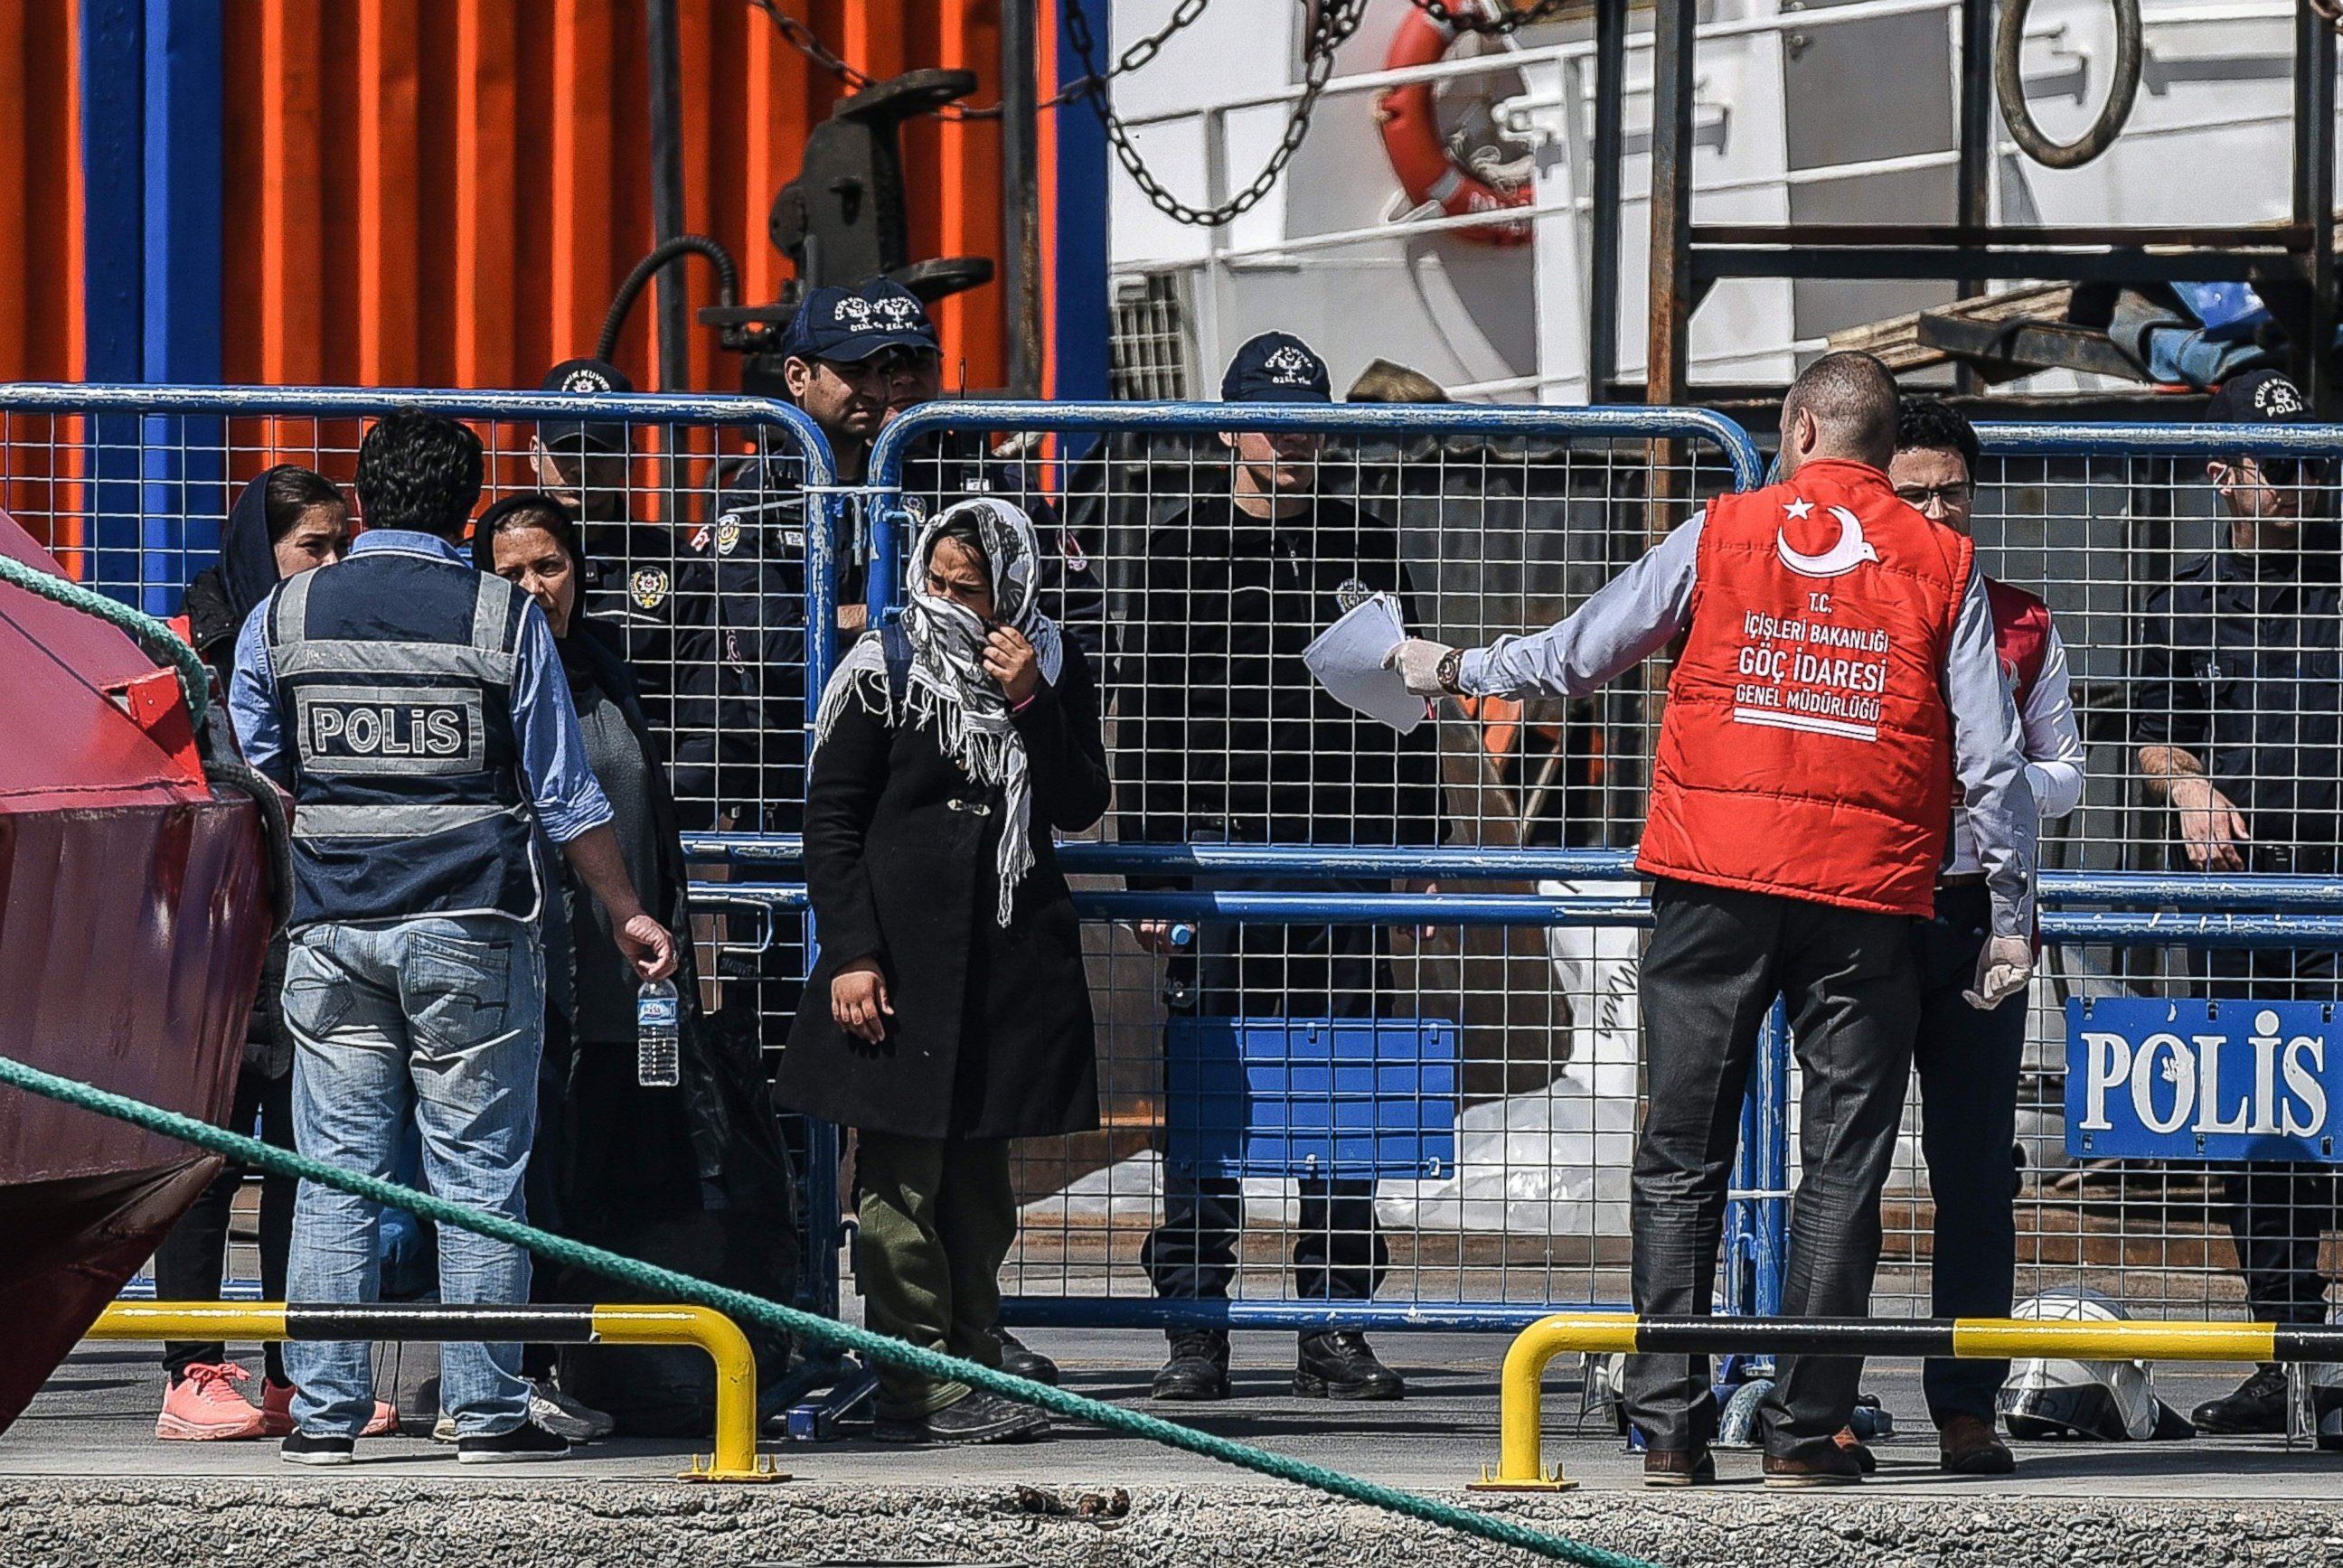 PHOTO: A Turkish police officer escorts deported women migrants from a small Turkish ferry carrying migrants who are deported to Turkey on April 4, 2016 as they arrive at the port of Dikili district in Izmir.  